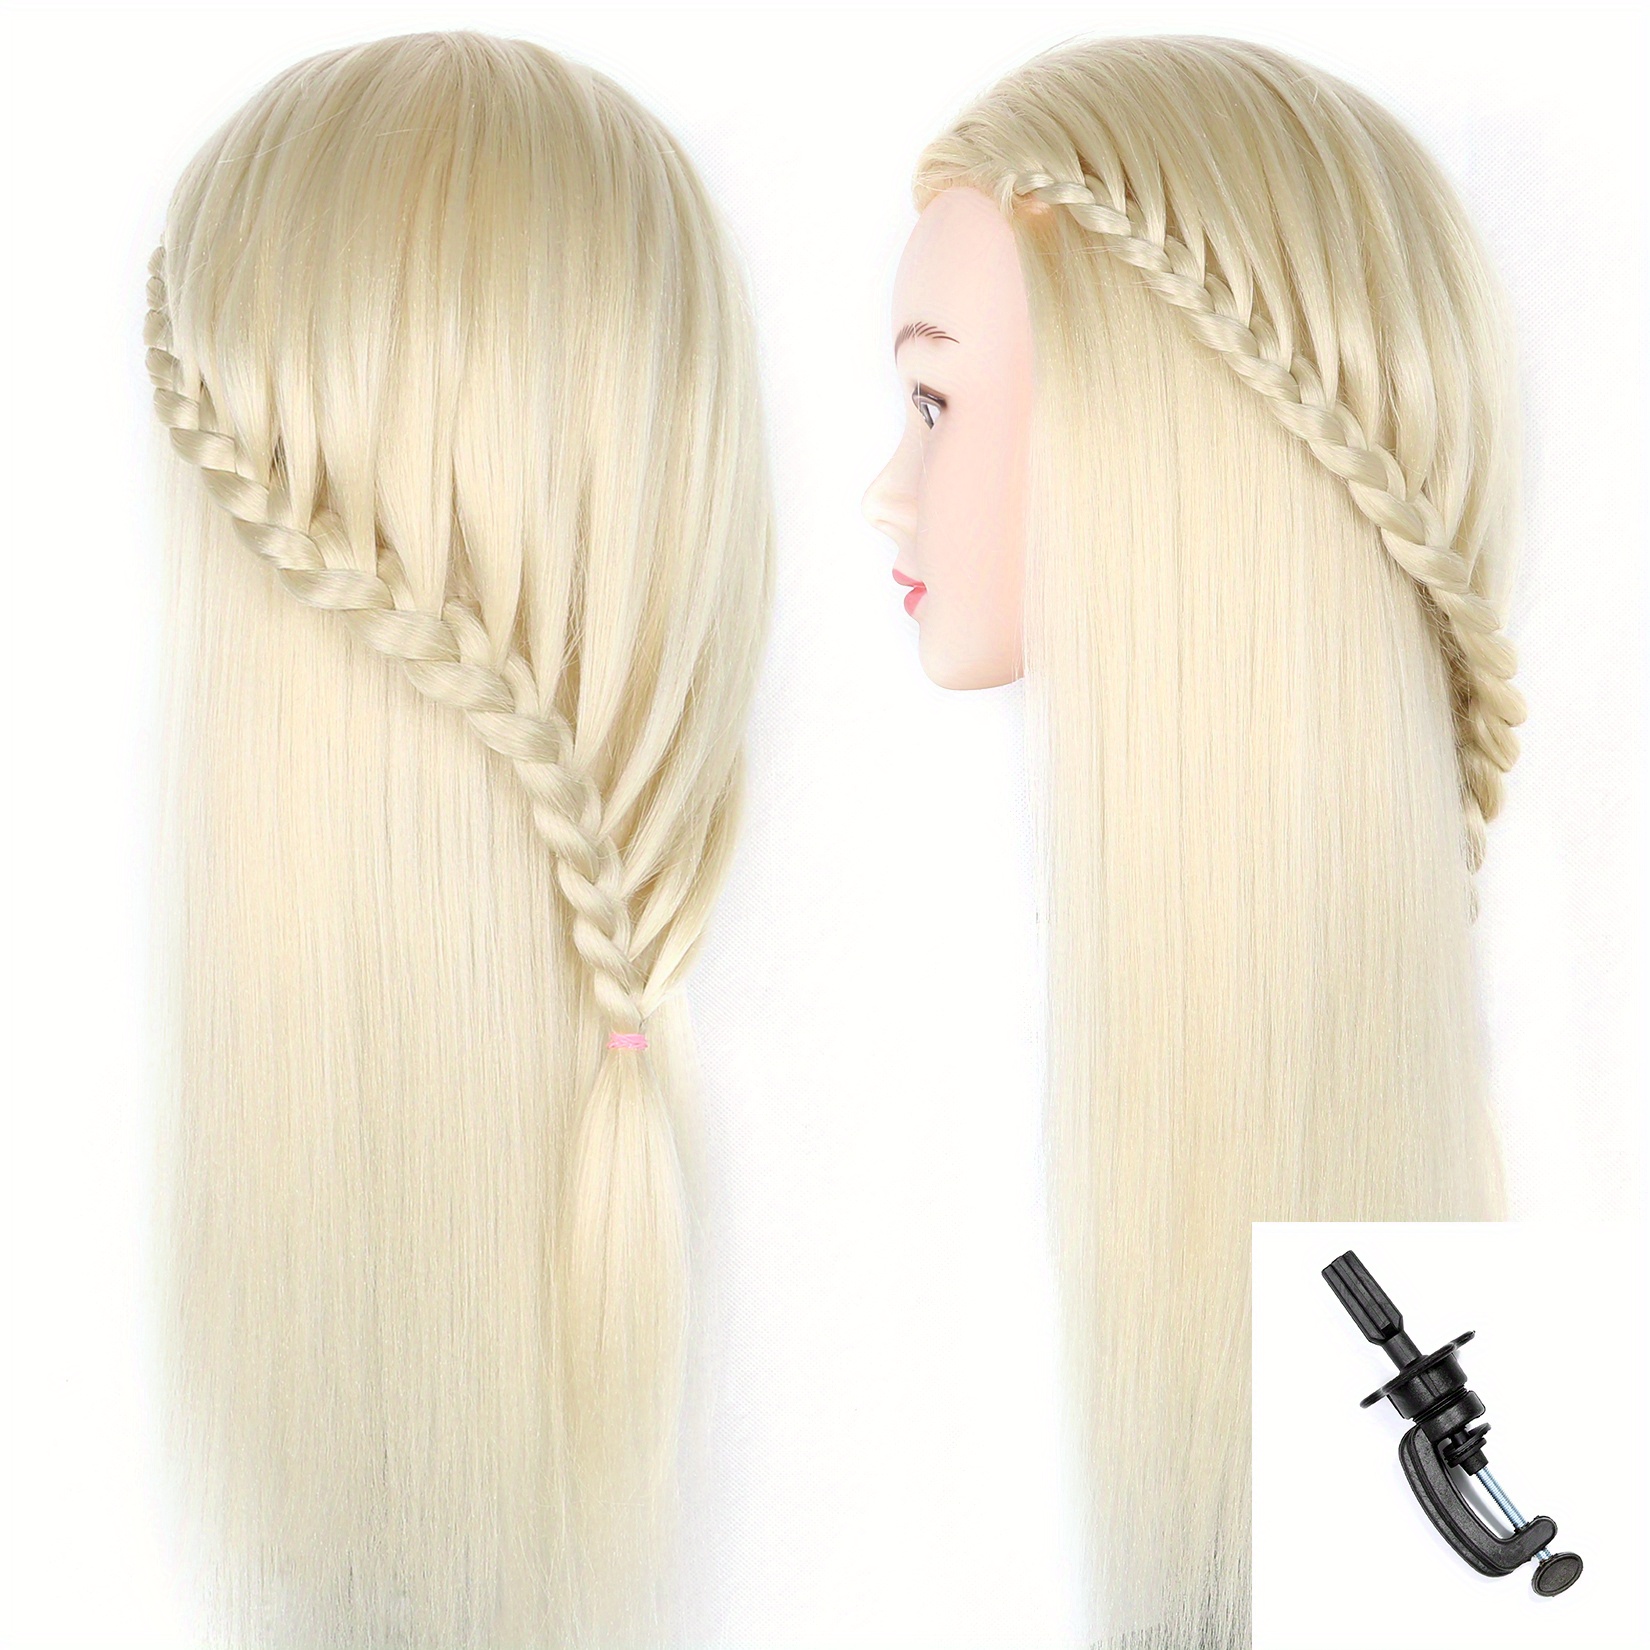 Cosmetology Mannequin Head With Synthetic Hair And Adjustable Stand 26-28 Blonde For Braiding Hair Styling Training Hairart Hairdressing Salon